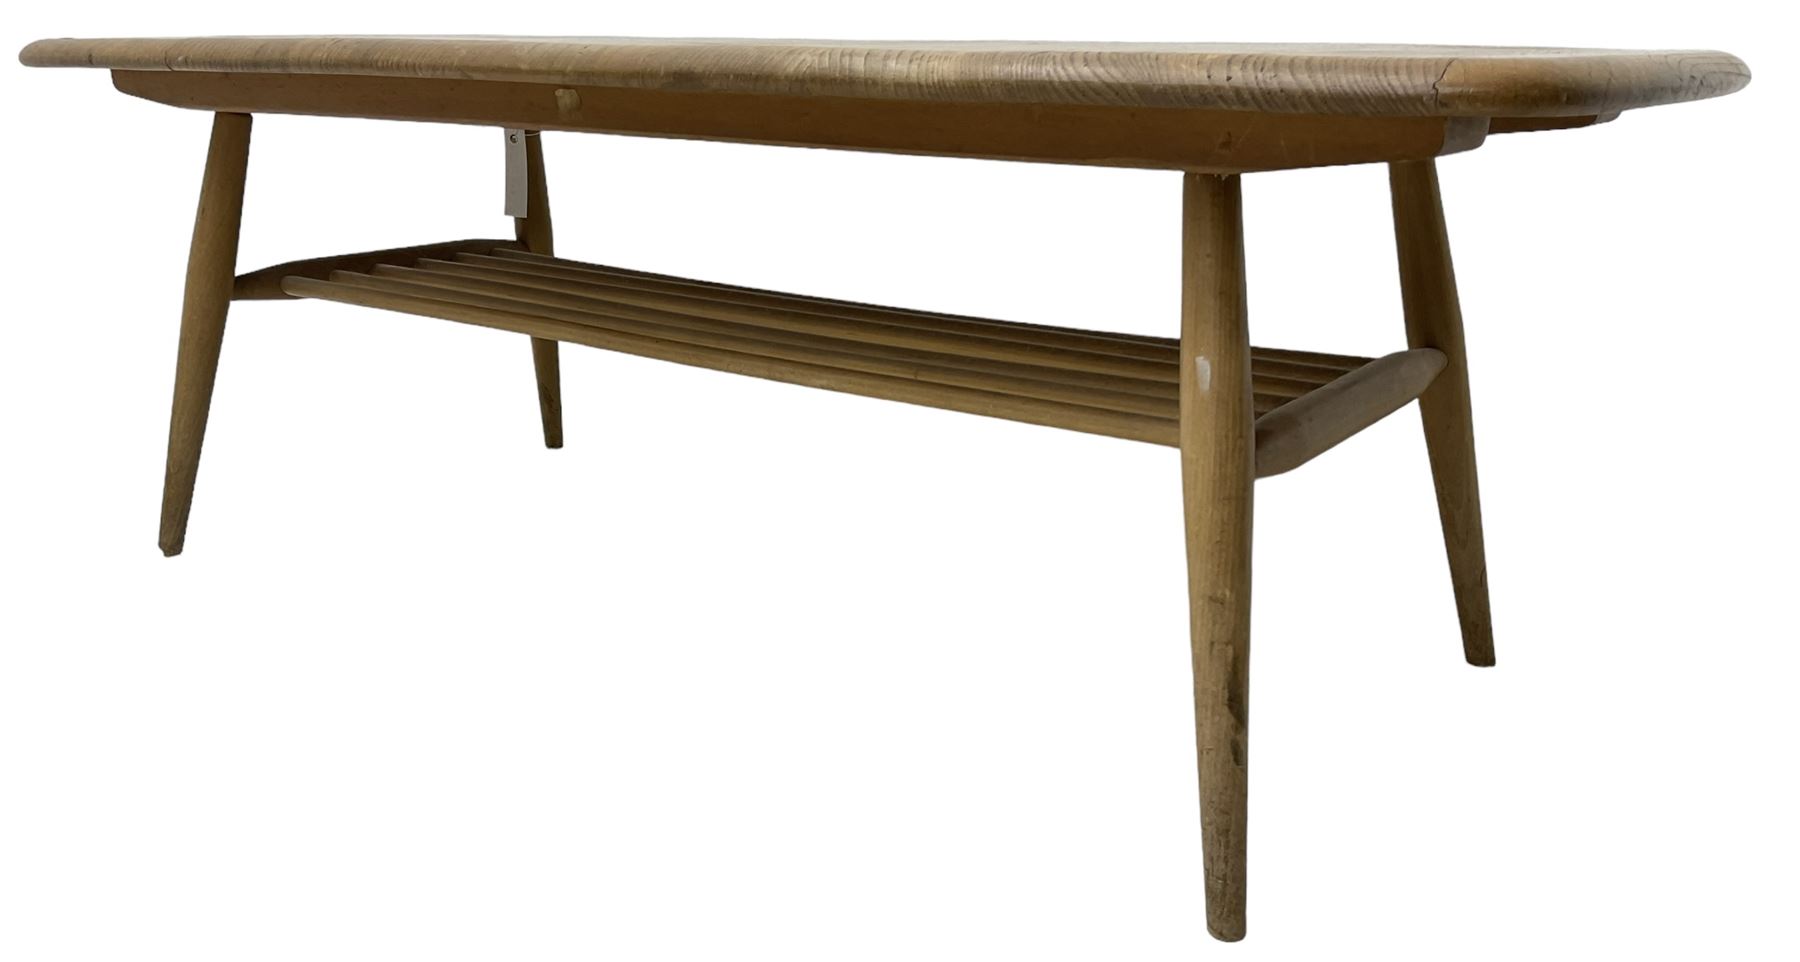 Ercol - mid-20th century blonde elm and beech model 459 coffee table - Image 2 of 7